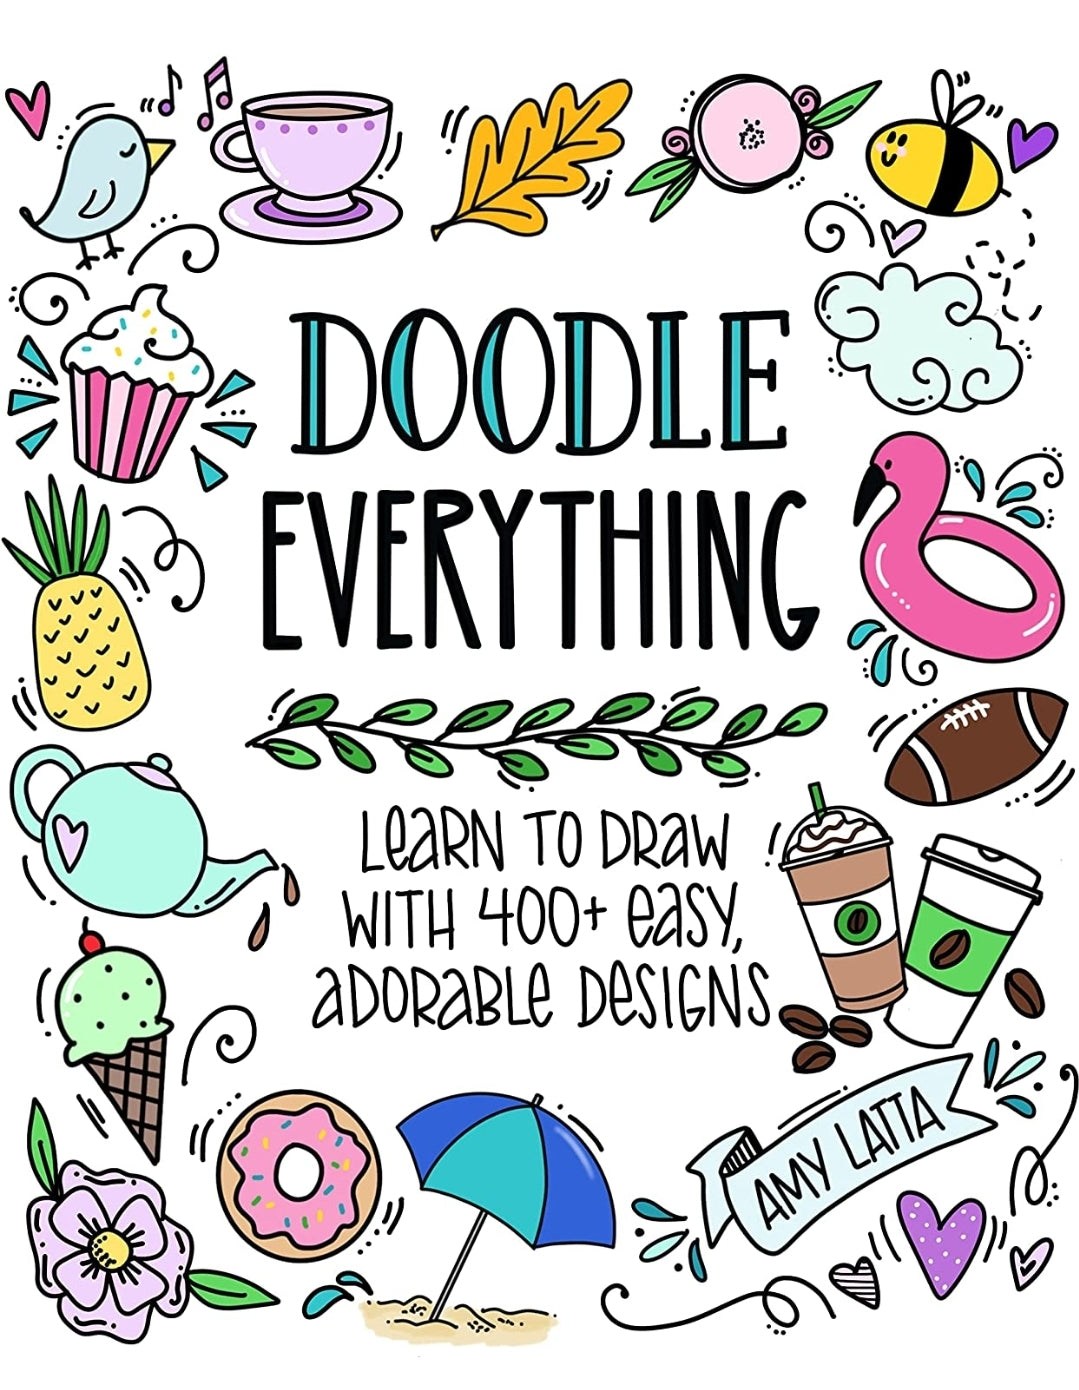 Doodle Everything!: Learn to Draw with 400+ Easy, Adorable Designs